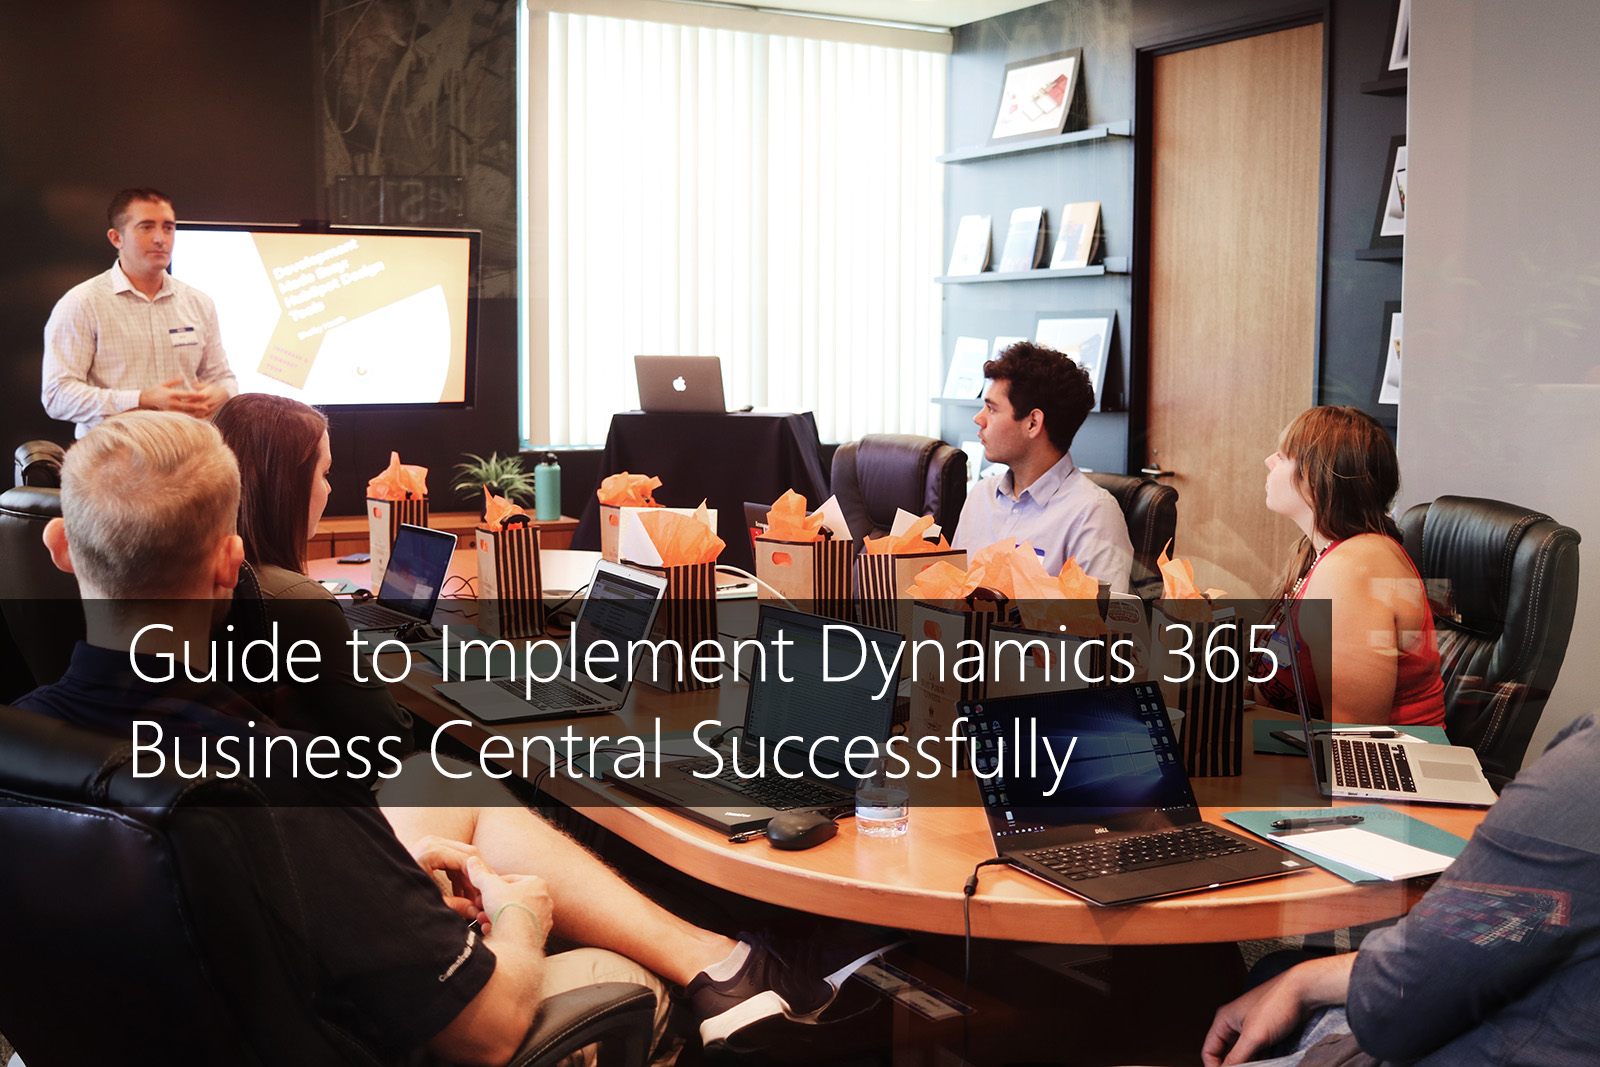 TMC-blog-guide-to-implement-dynamics-365-business-central-successfully